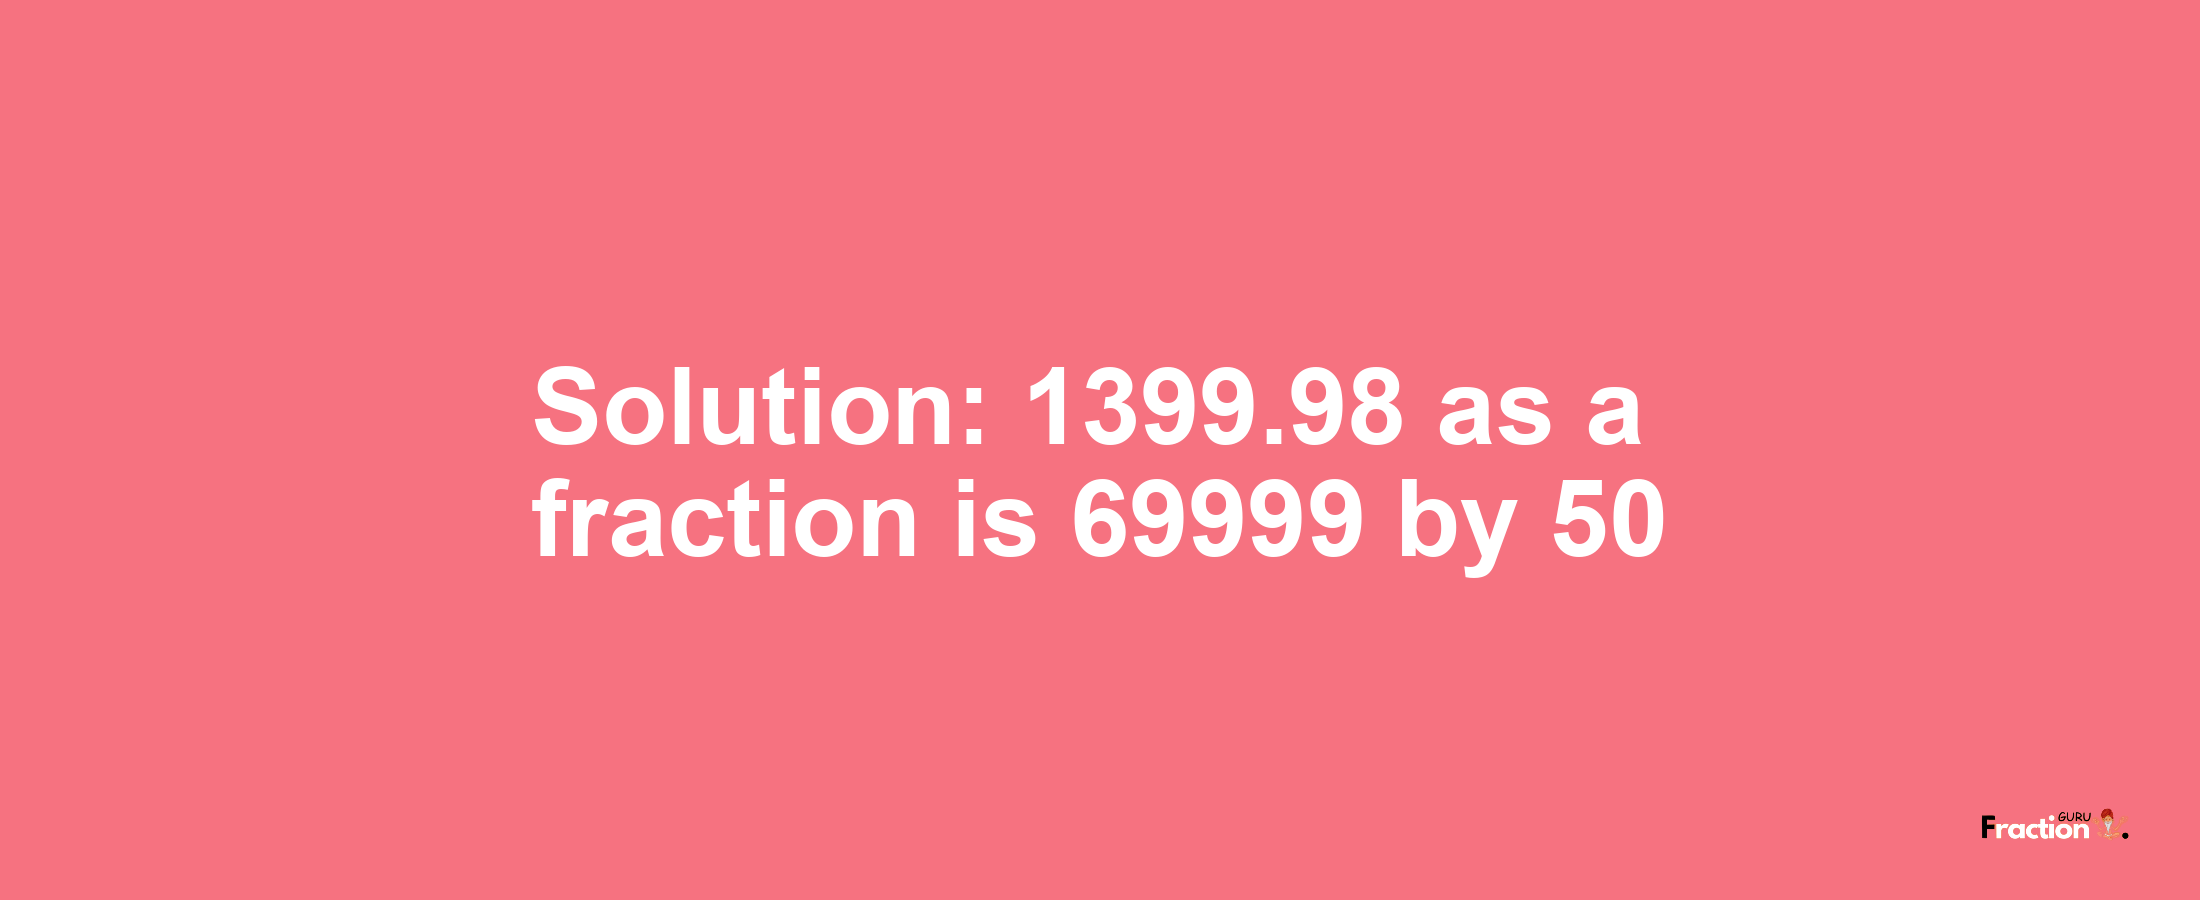 Solution:1399.98 as a fraction is 69999/50